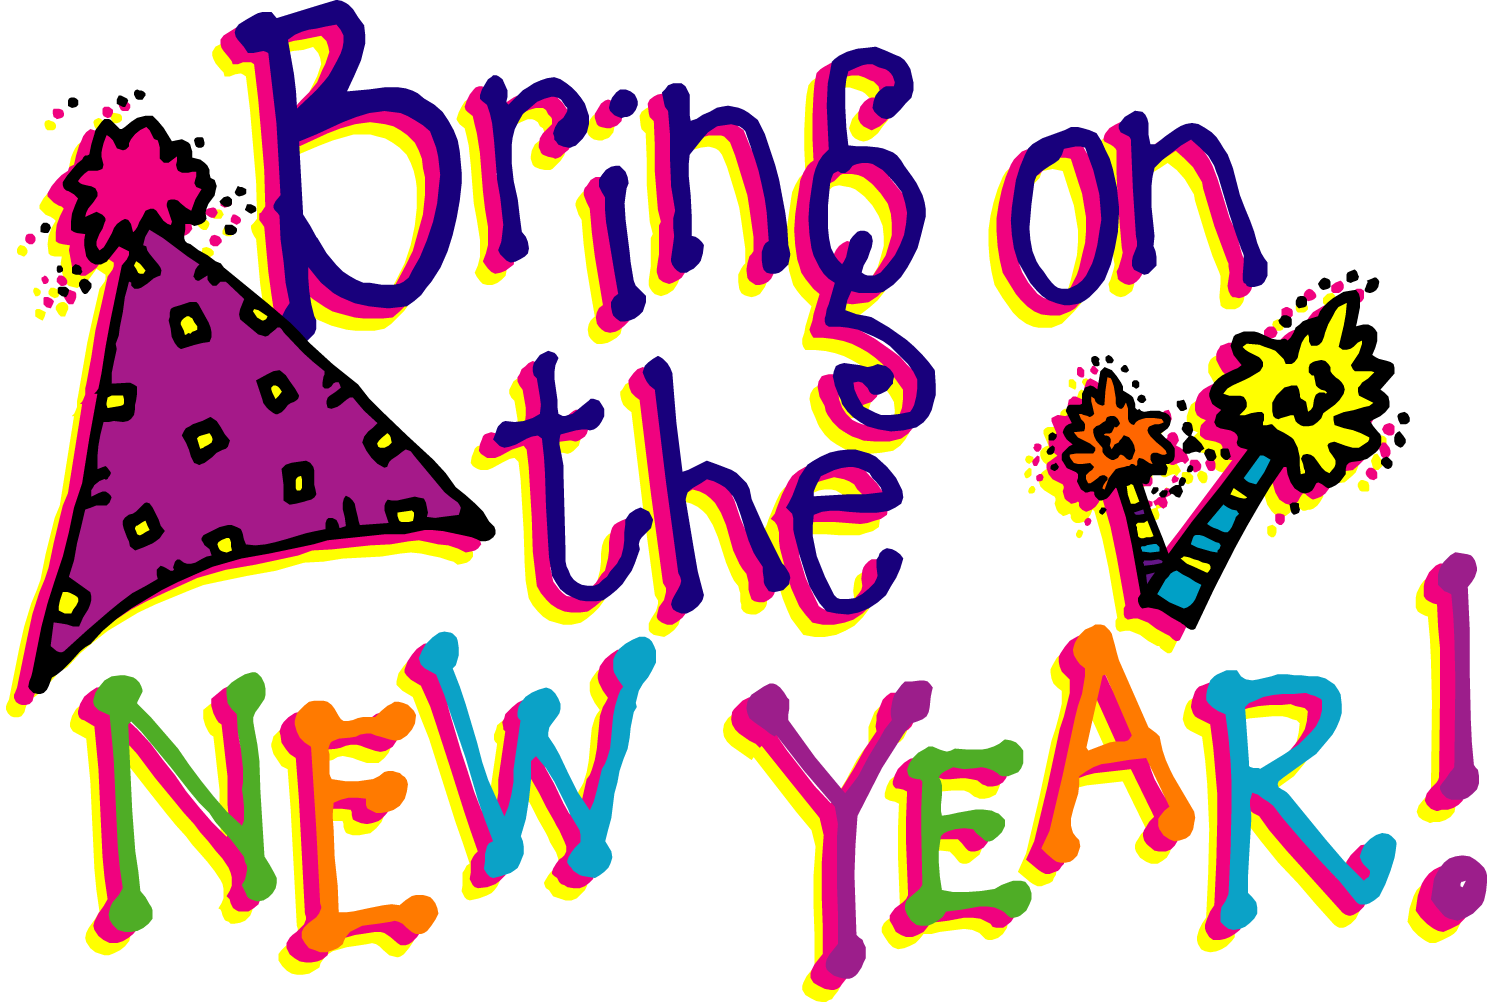 free-happy-new-year-clipart. 